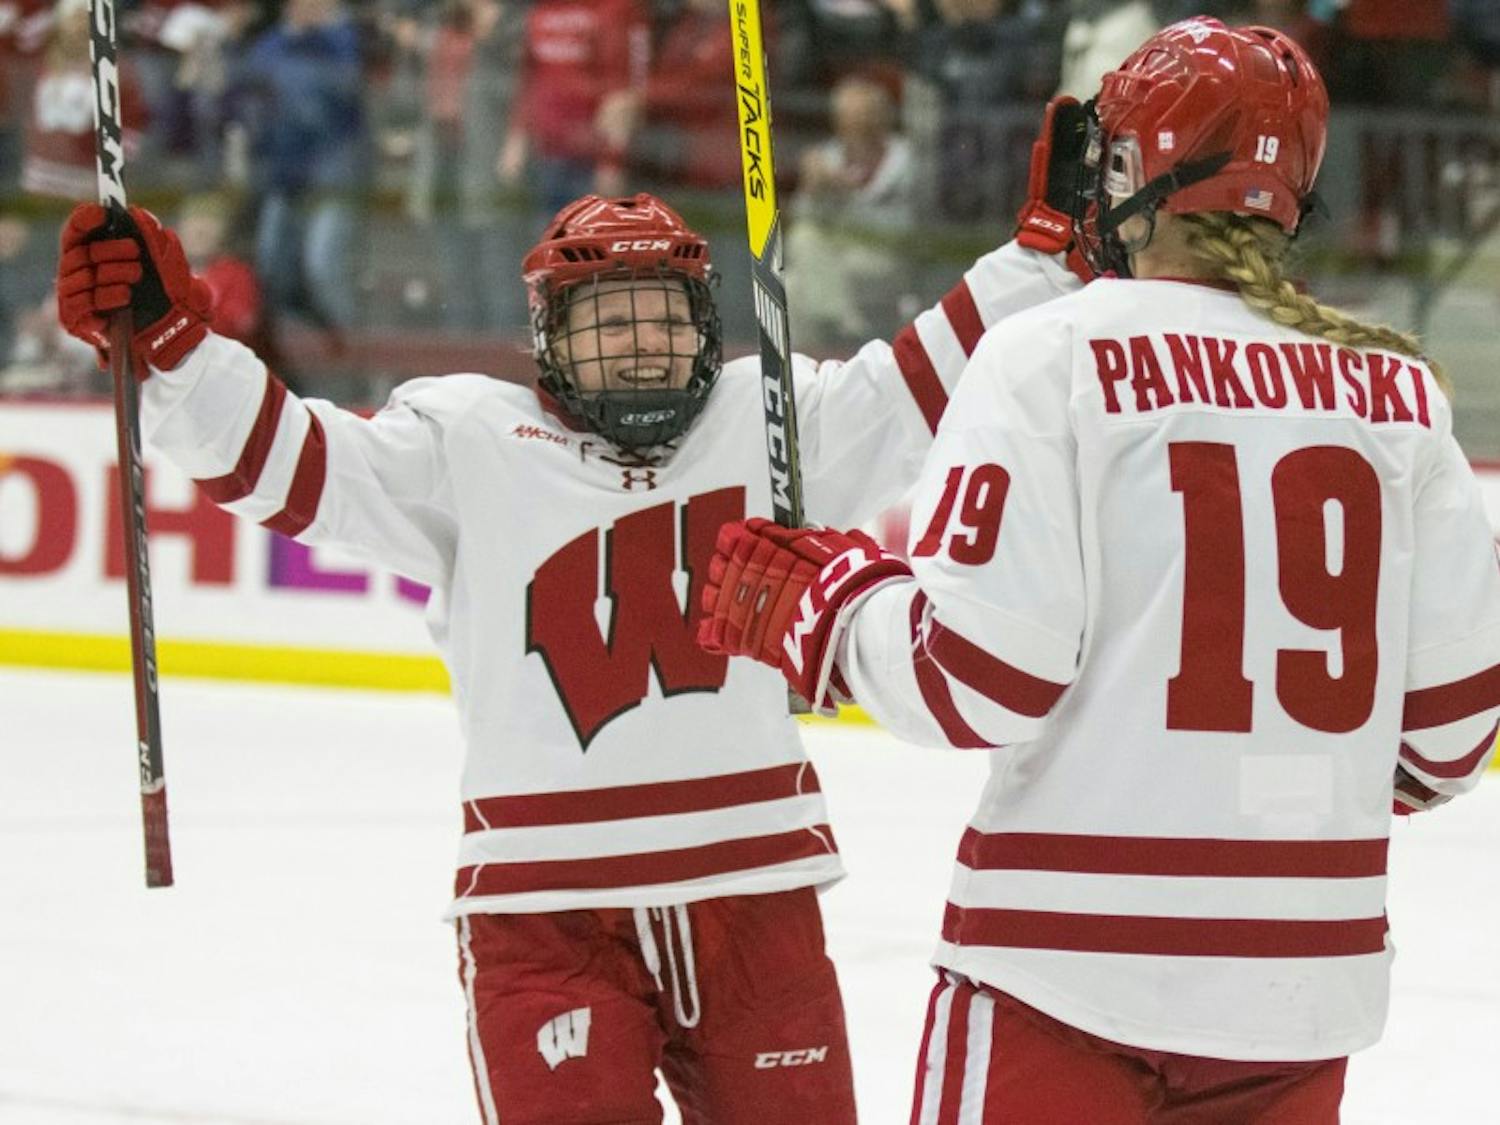 Senior forward Annie Pankowski scored five of Wisconsin's 11 goals in the NCAA tournament as the Badgers captured their fifth national title.